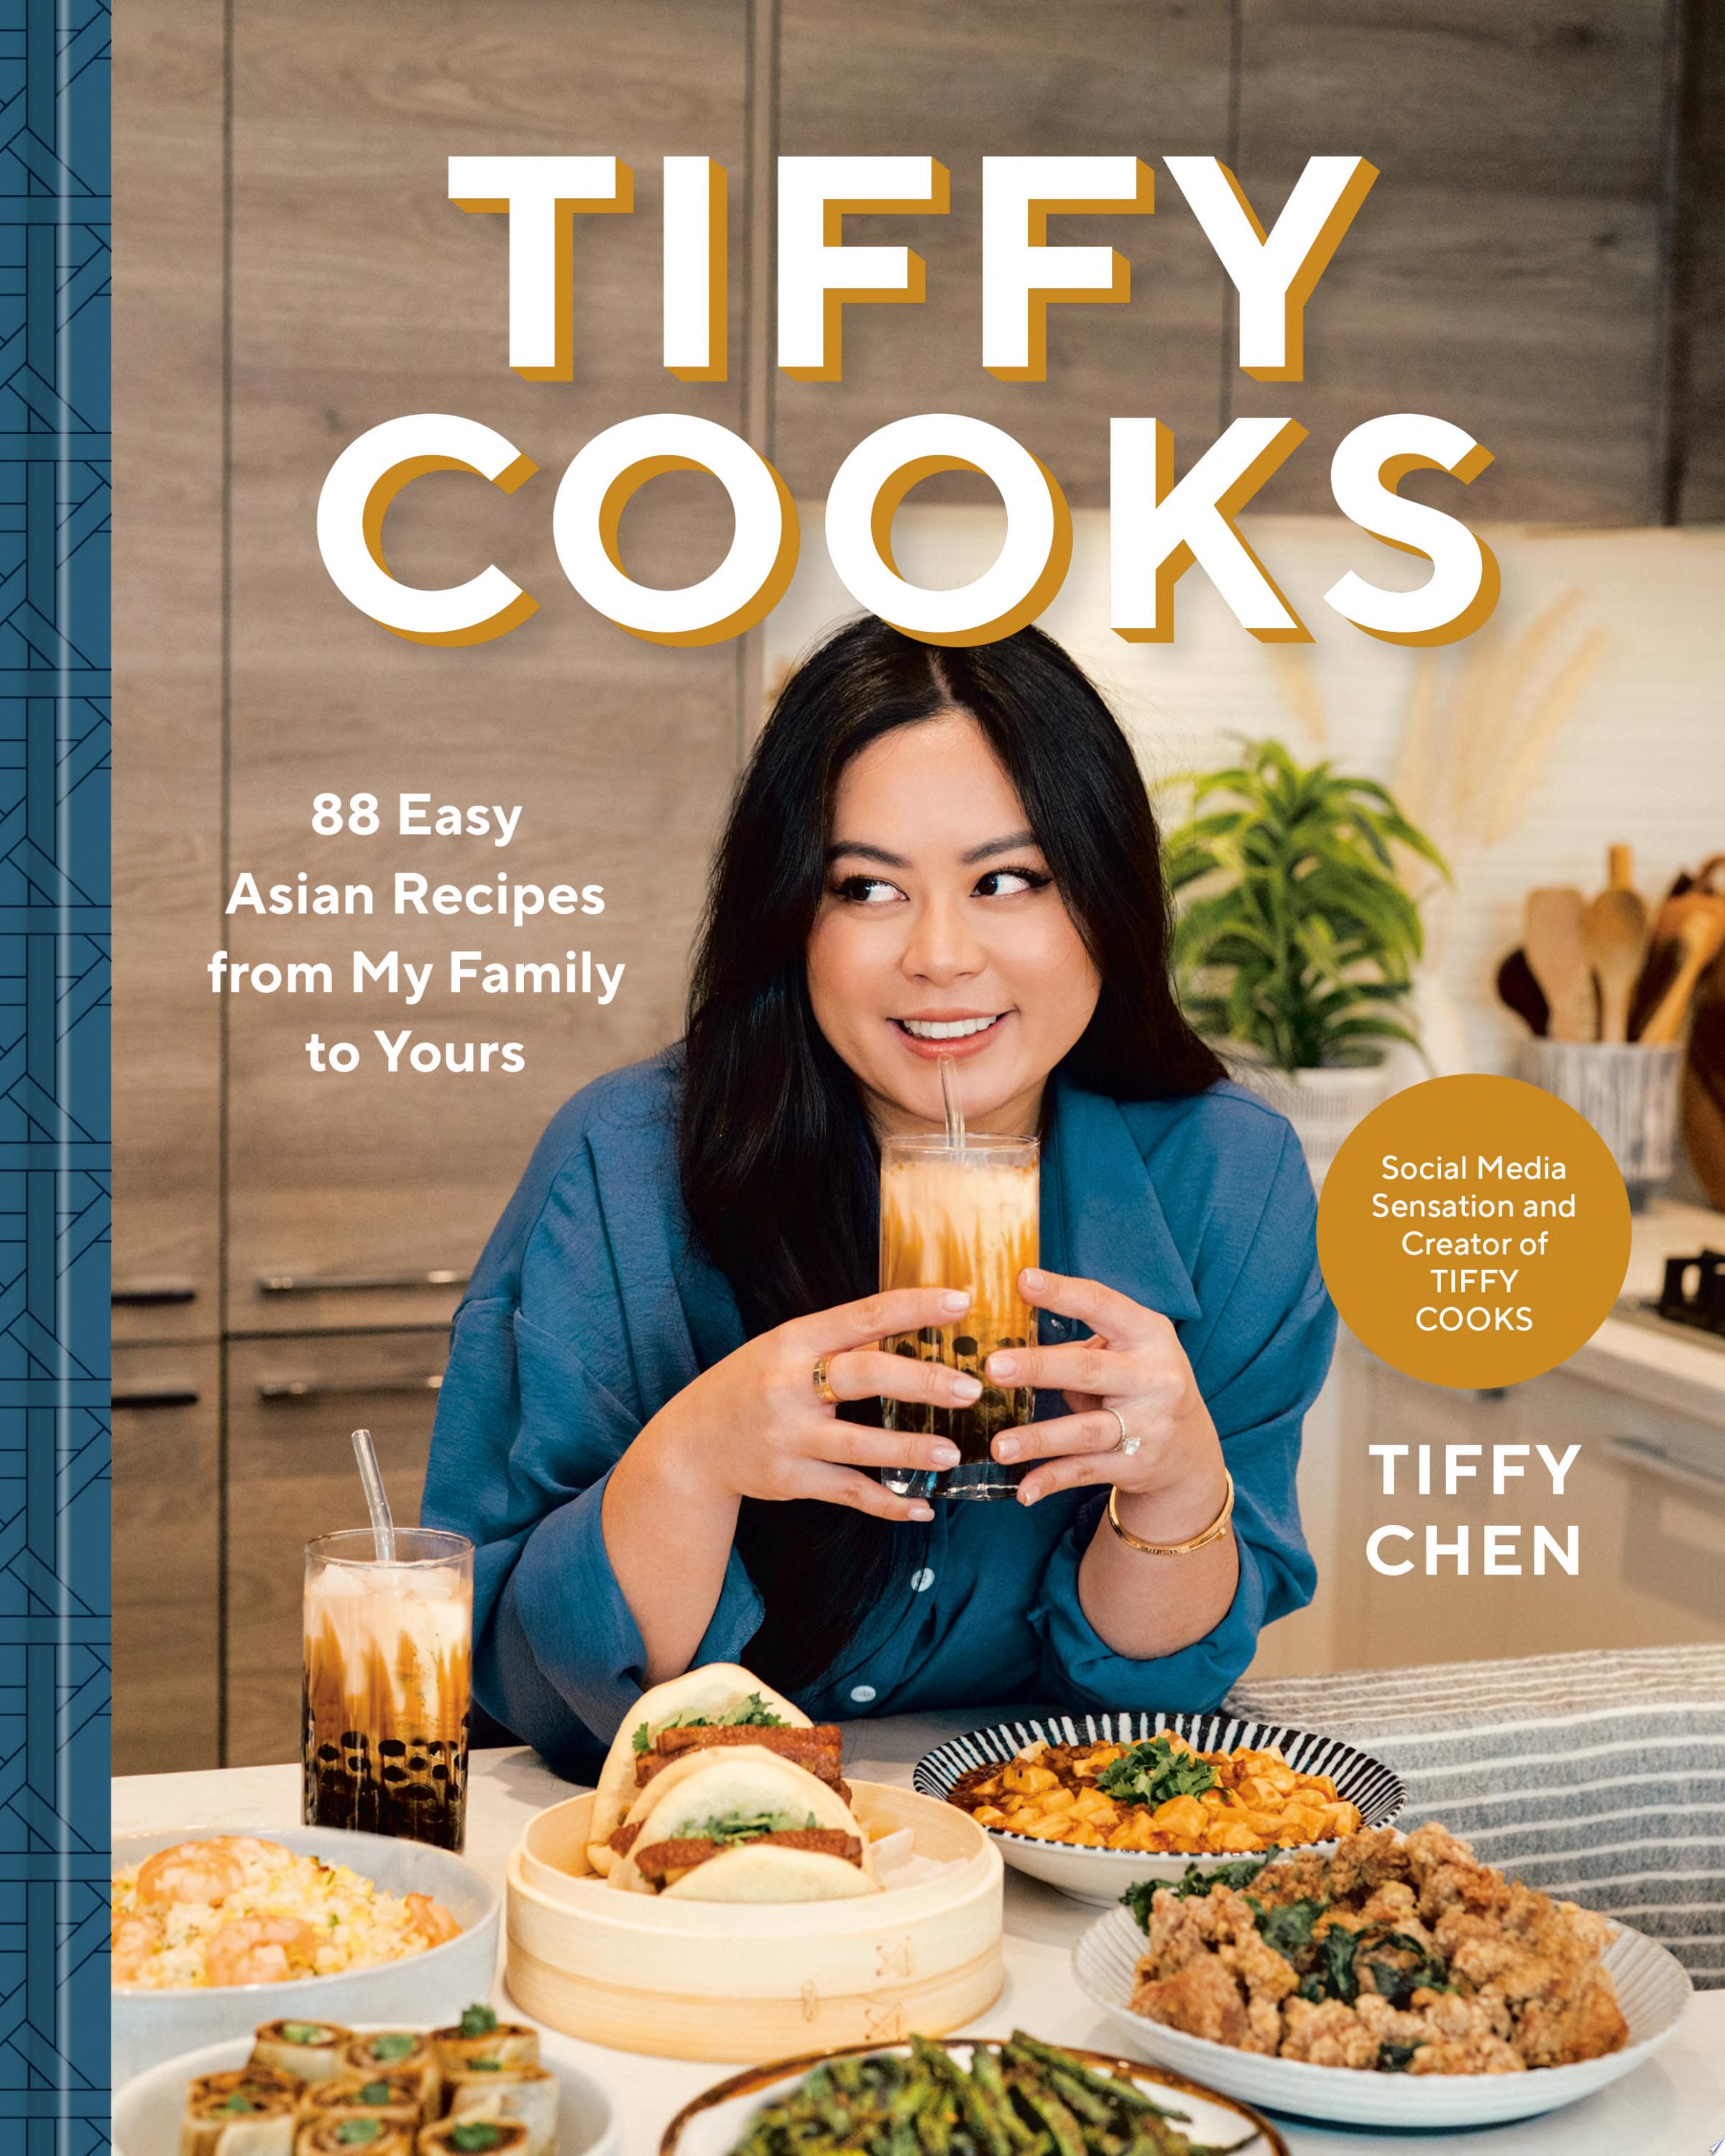 Image for "Tiffy Cooks"